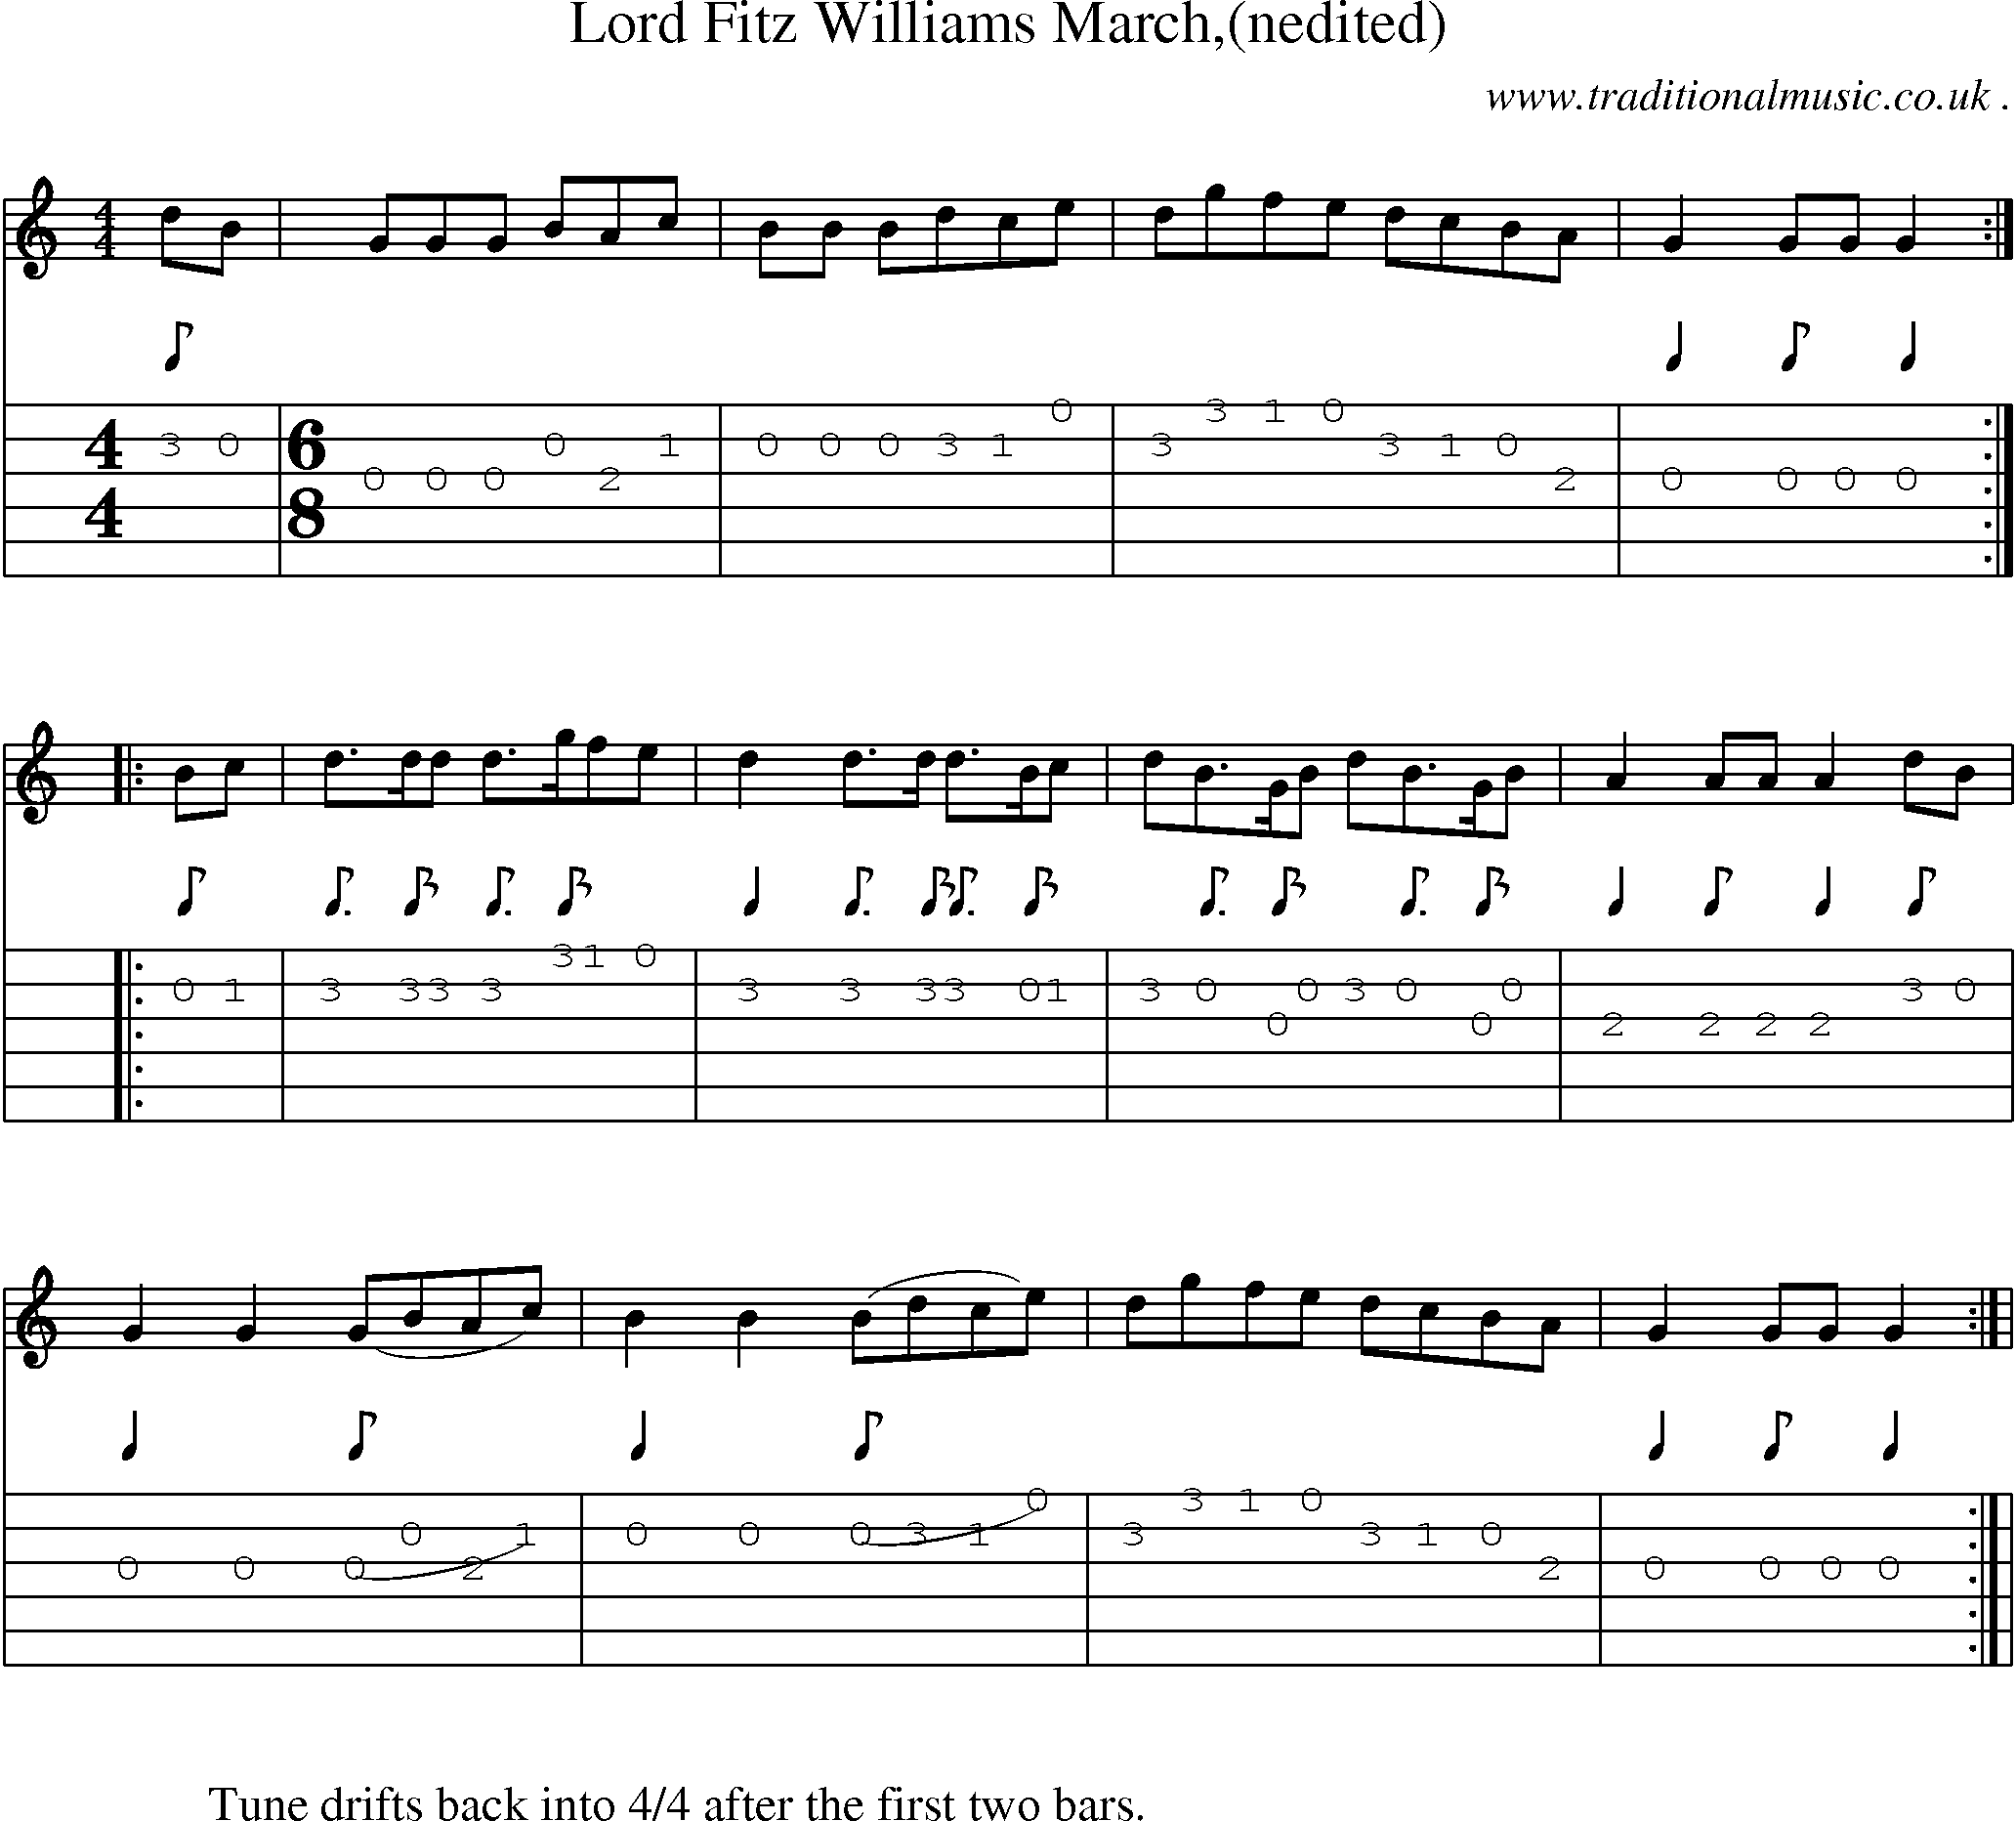 Sheet-Music and Guitar Tabs for Lord Fitz Williams March(nedited)